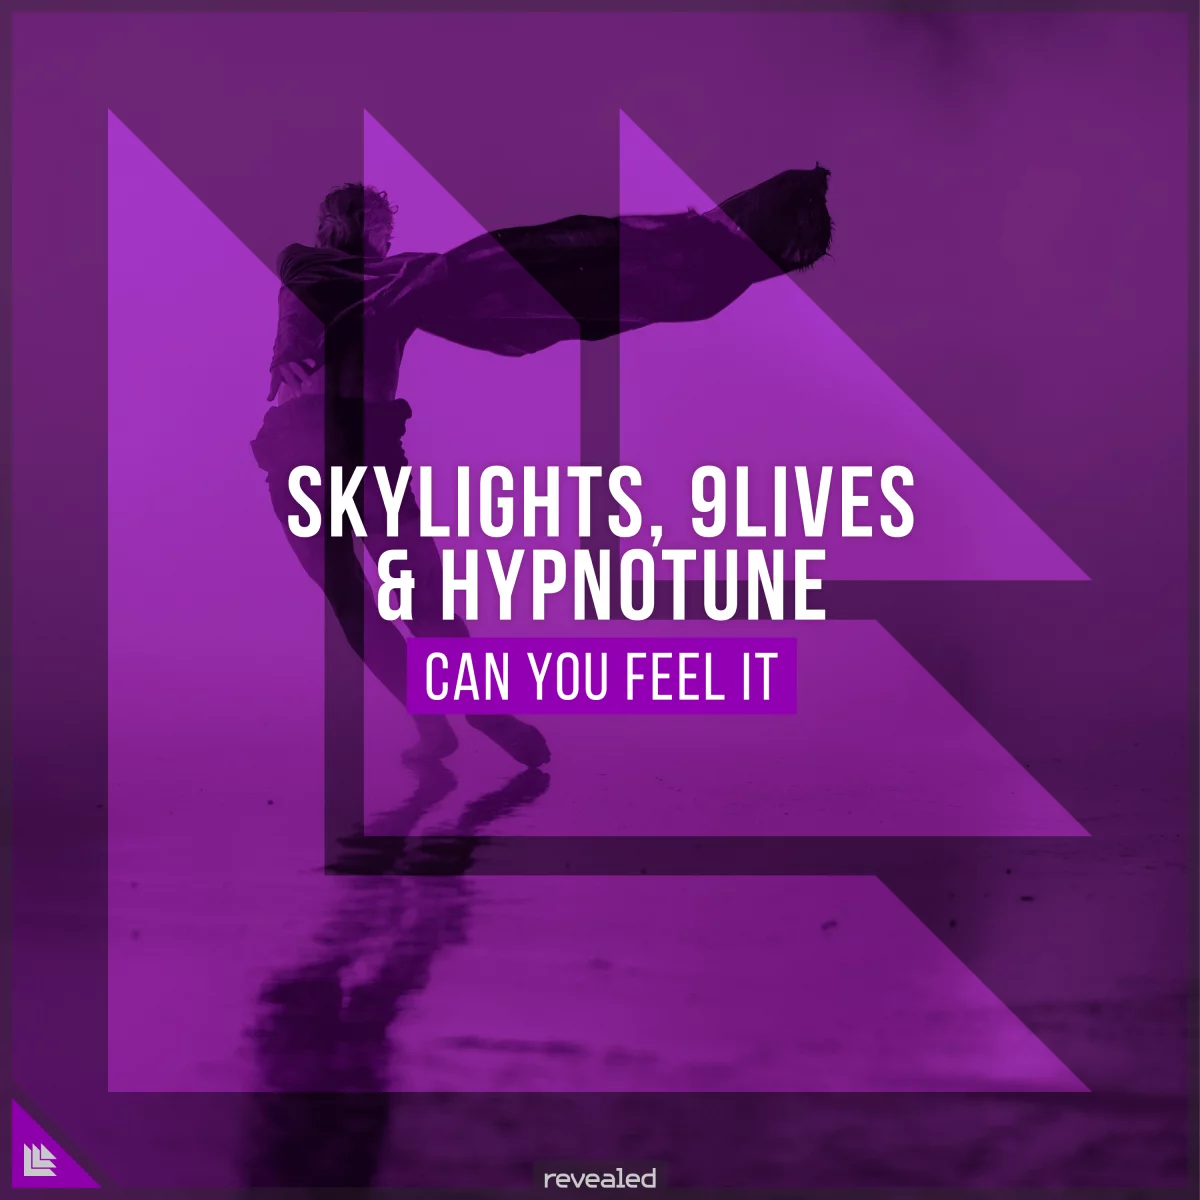 Can You Feel It - SkyLights⁠, 9Lives⁠ & Hypnotune⁠